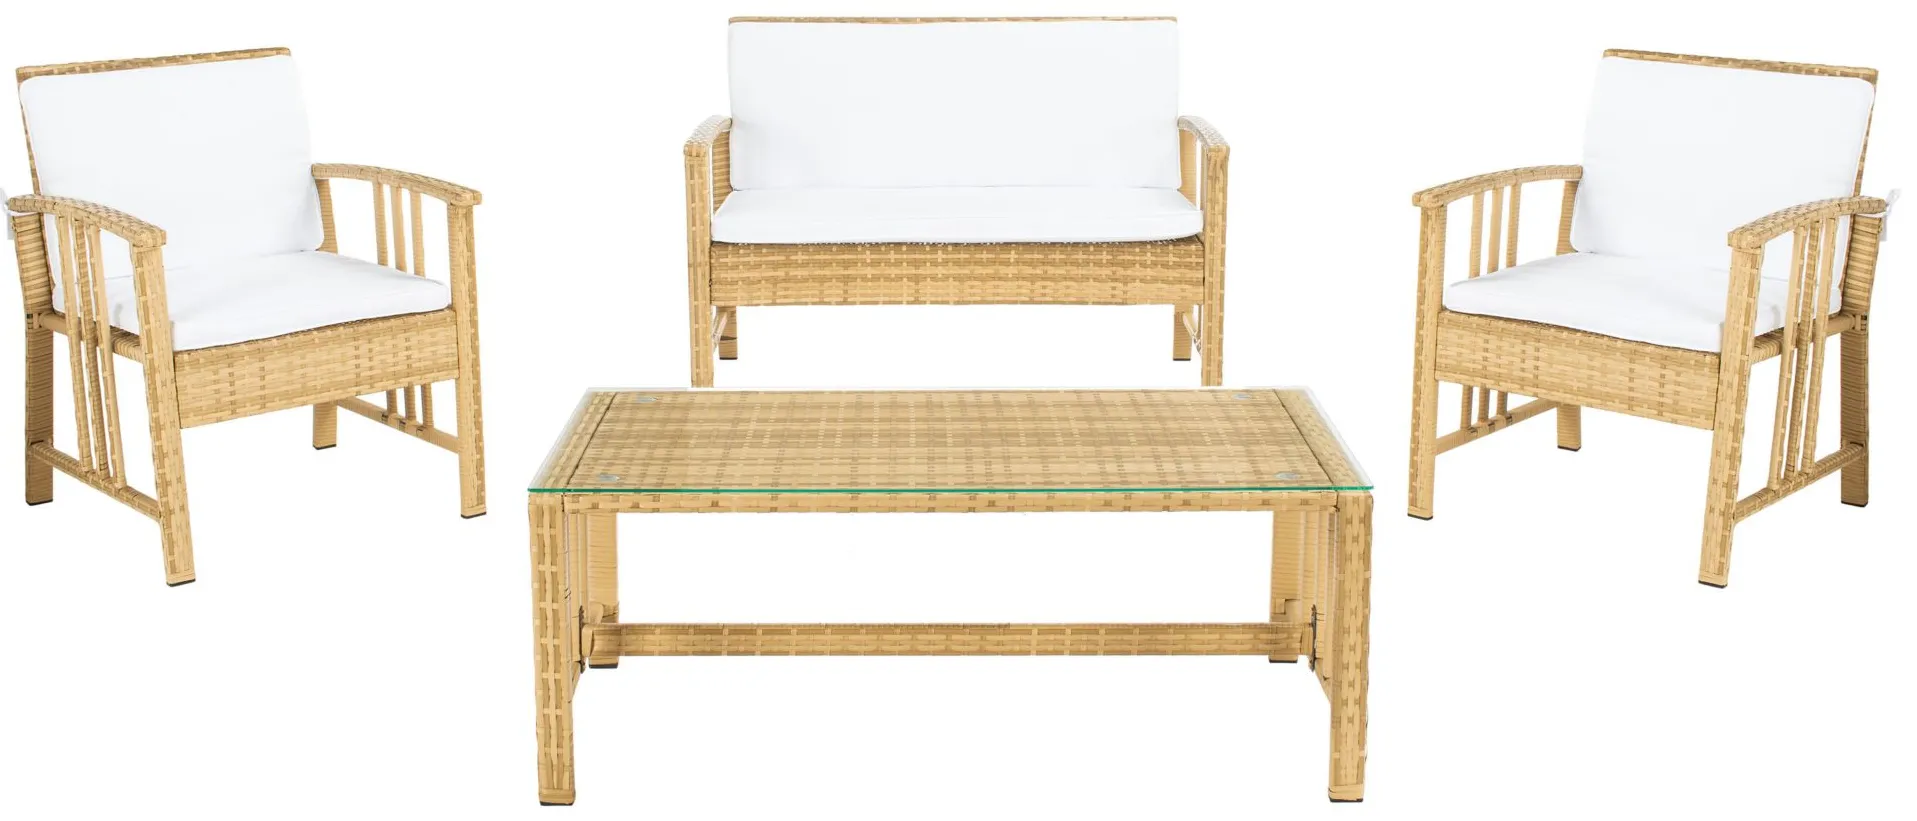 Dalit 4-pc. Patio Set in Natural / White by Safavieh